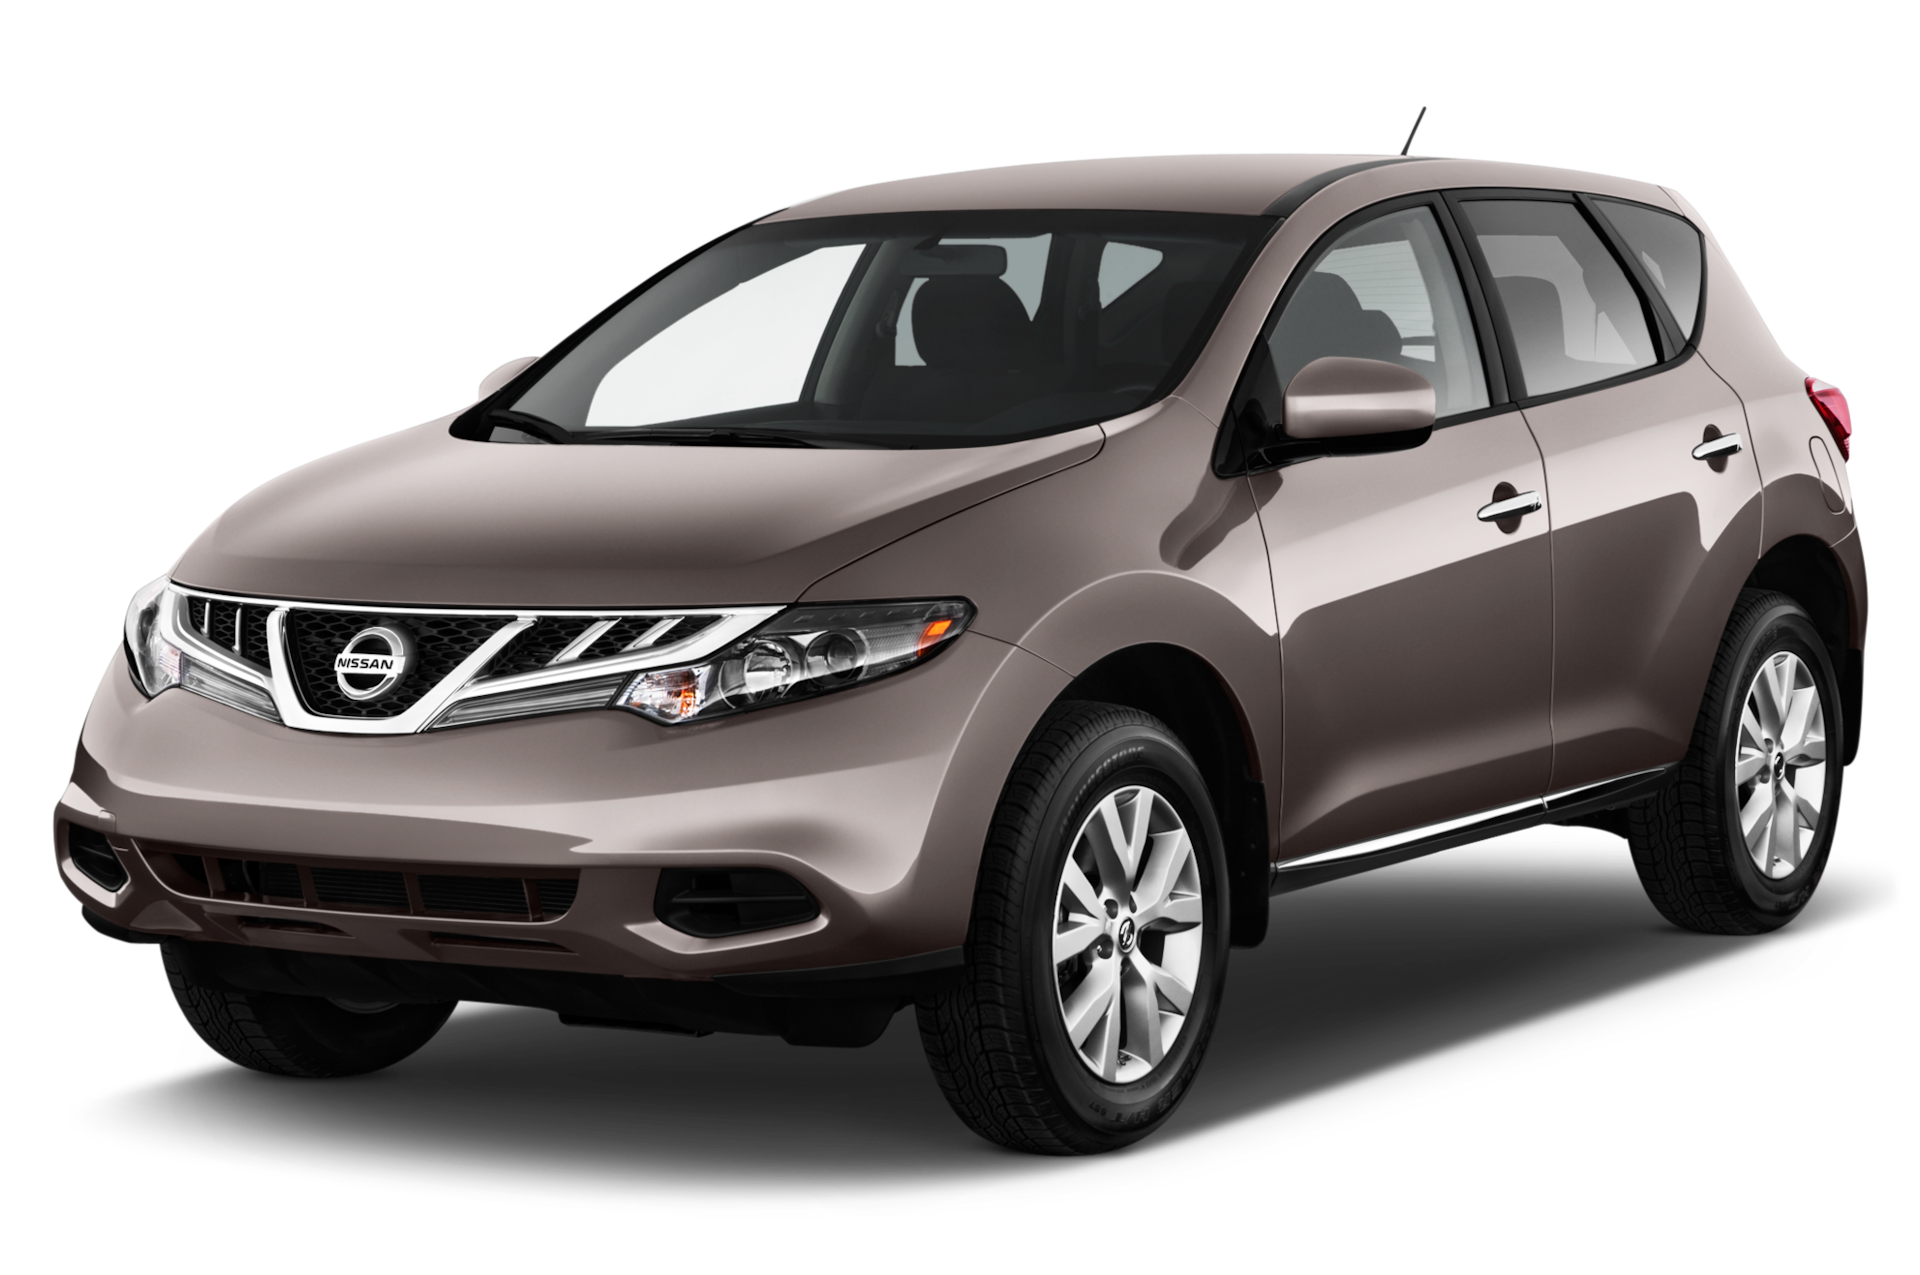 2013 Nissan Murano Prices, Reviews, and Photos - MotorTrend